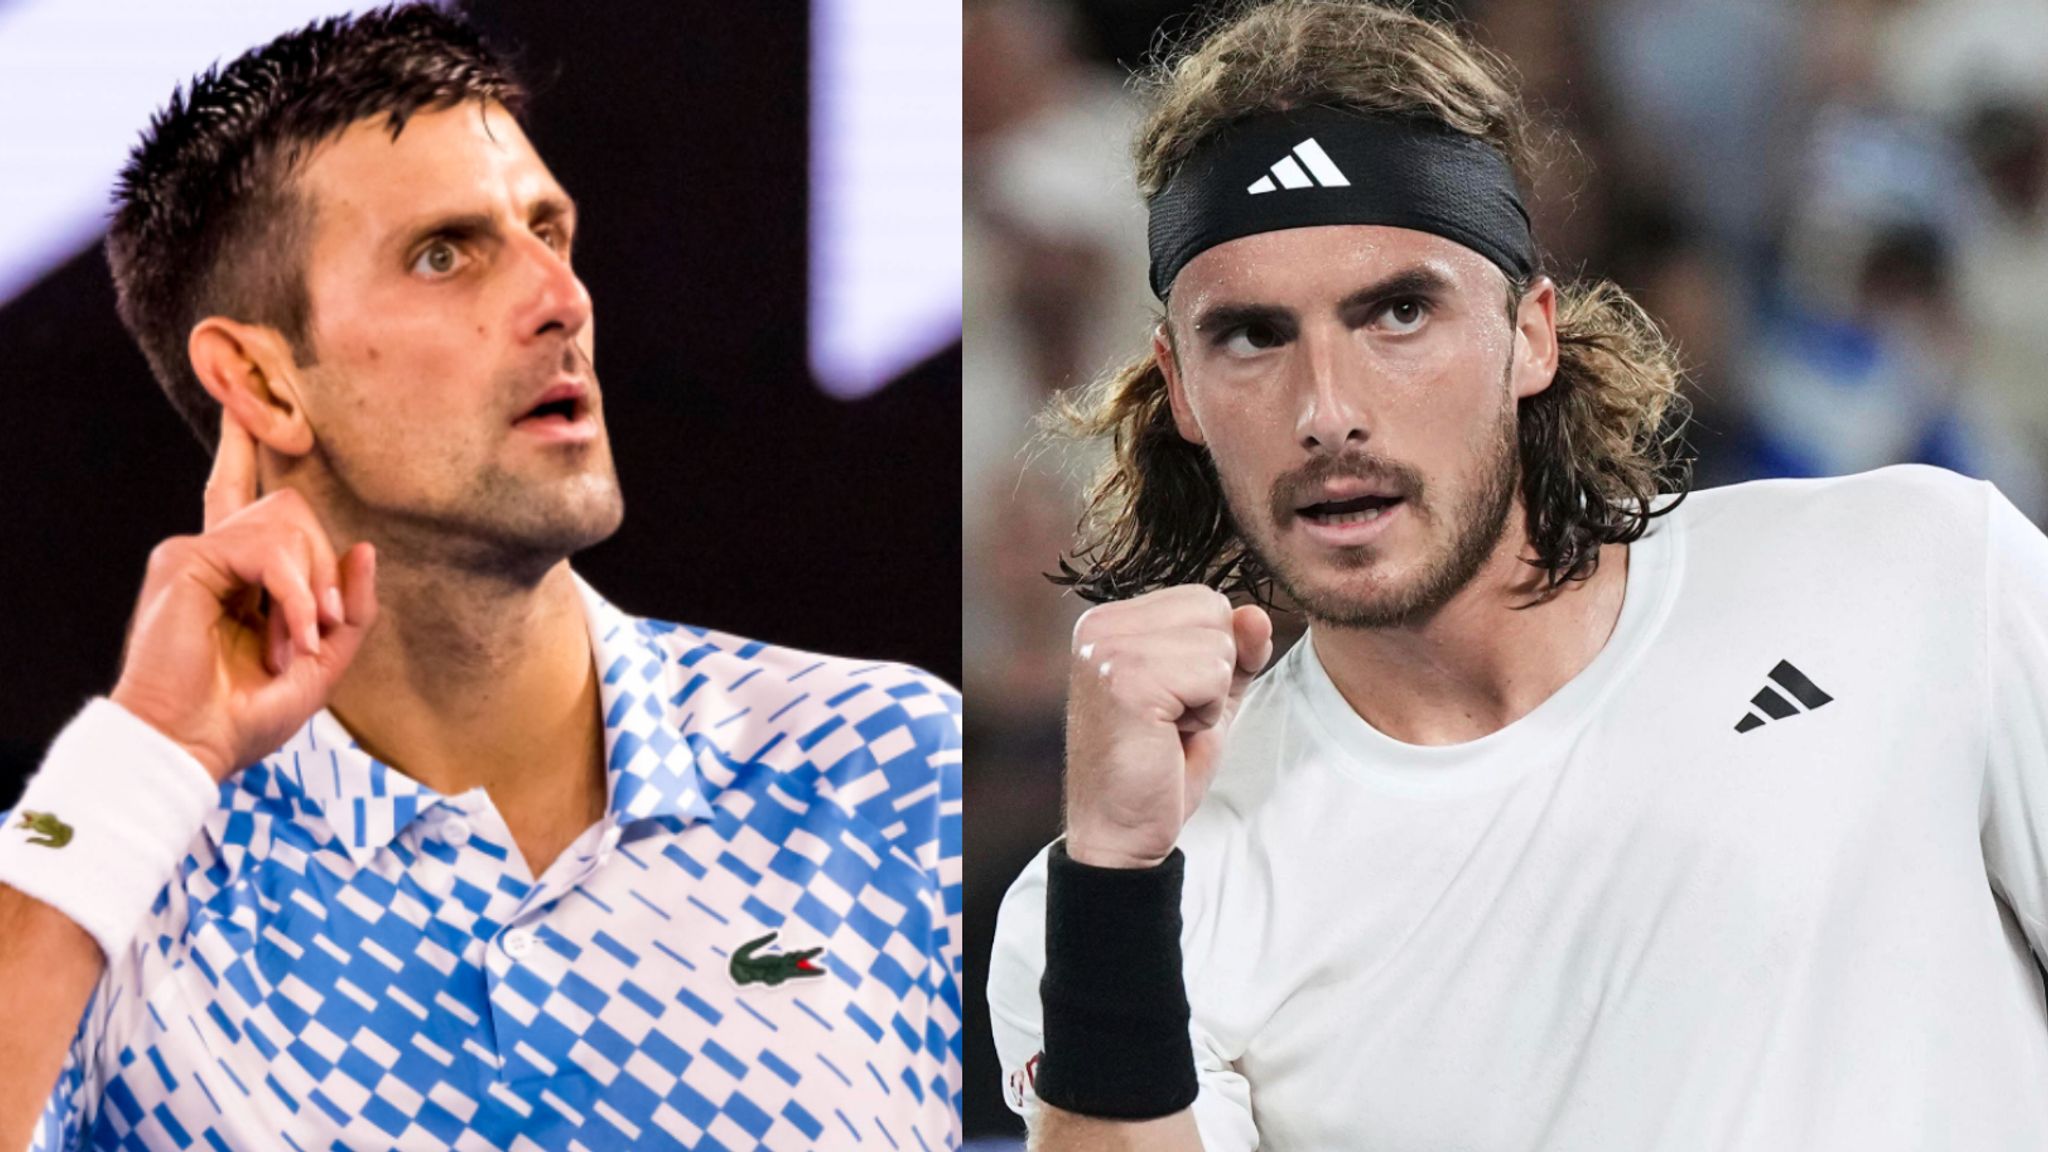 Australian Open Novak Djokovic ion course for a 10th title in Melbourne with Stefanos Tsitsipas standing in his way Tennis News Sky Sports